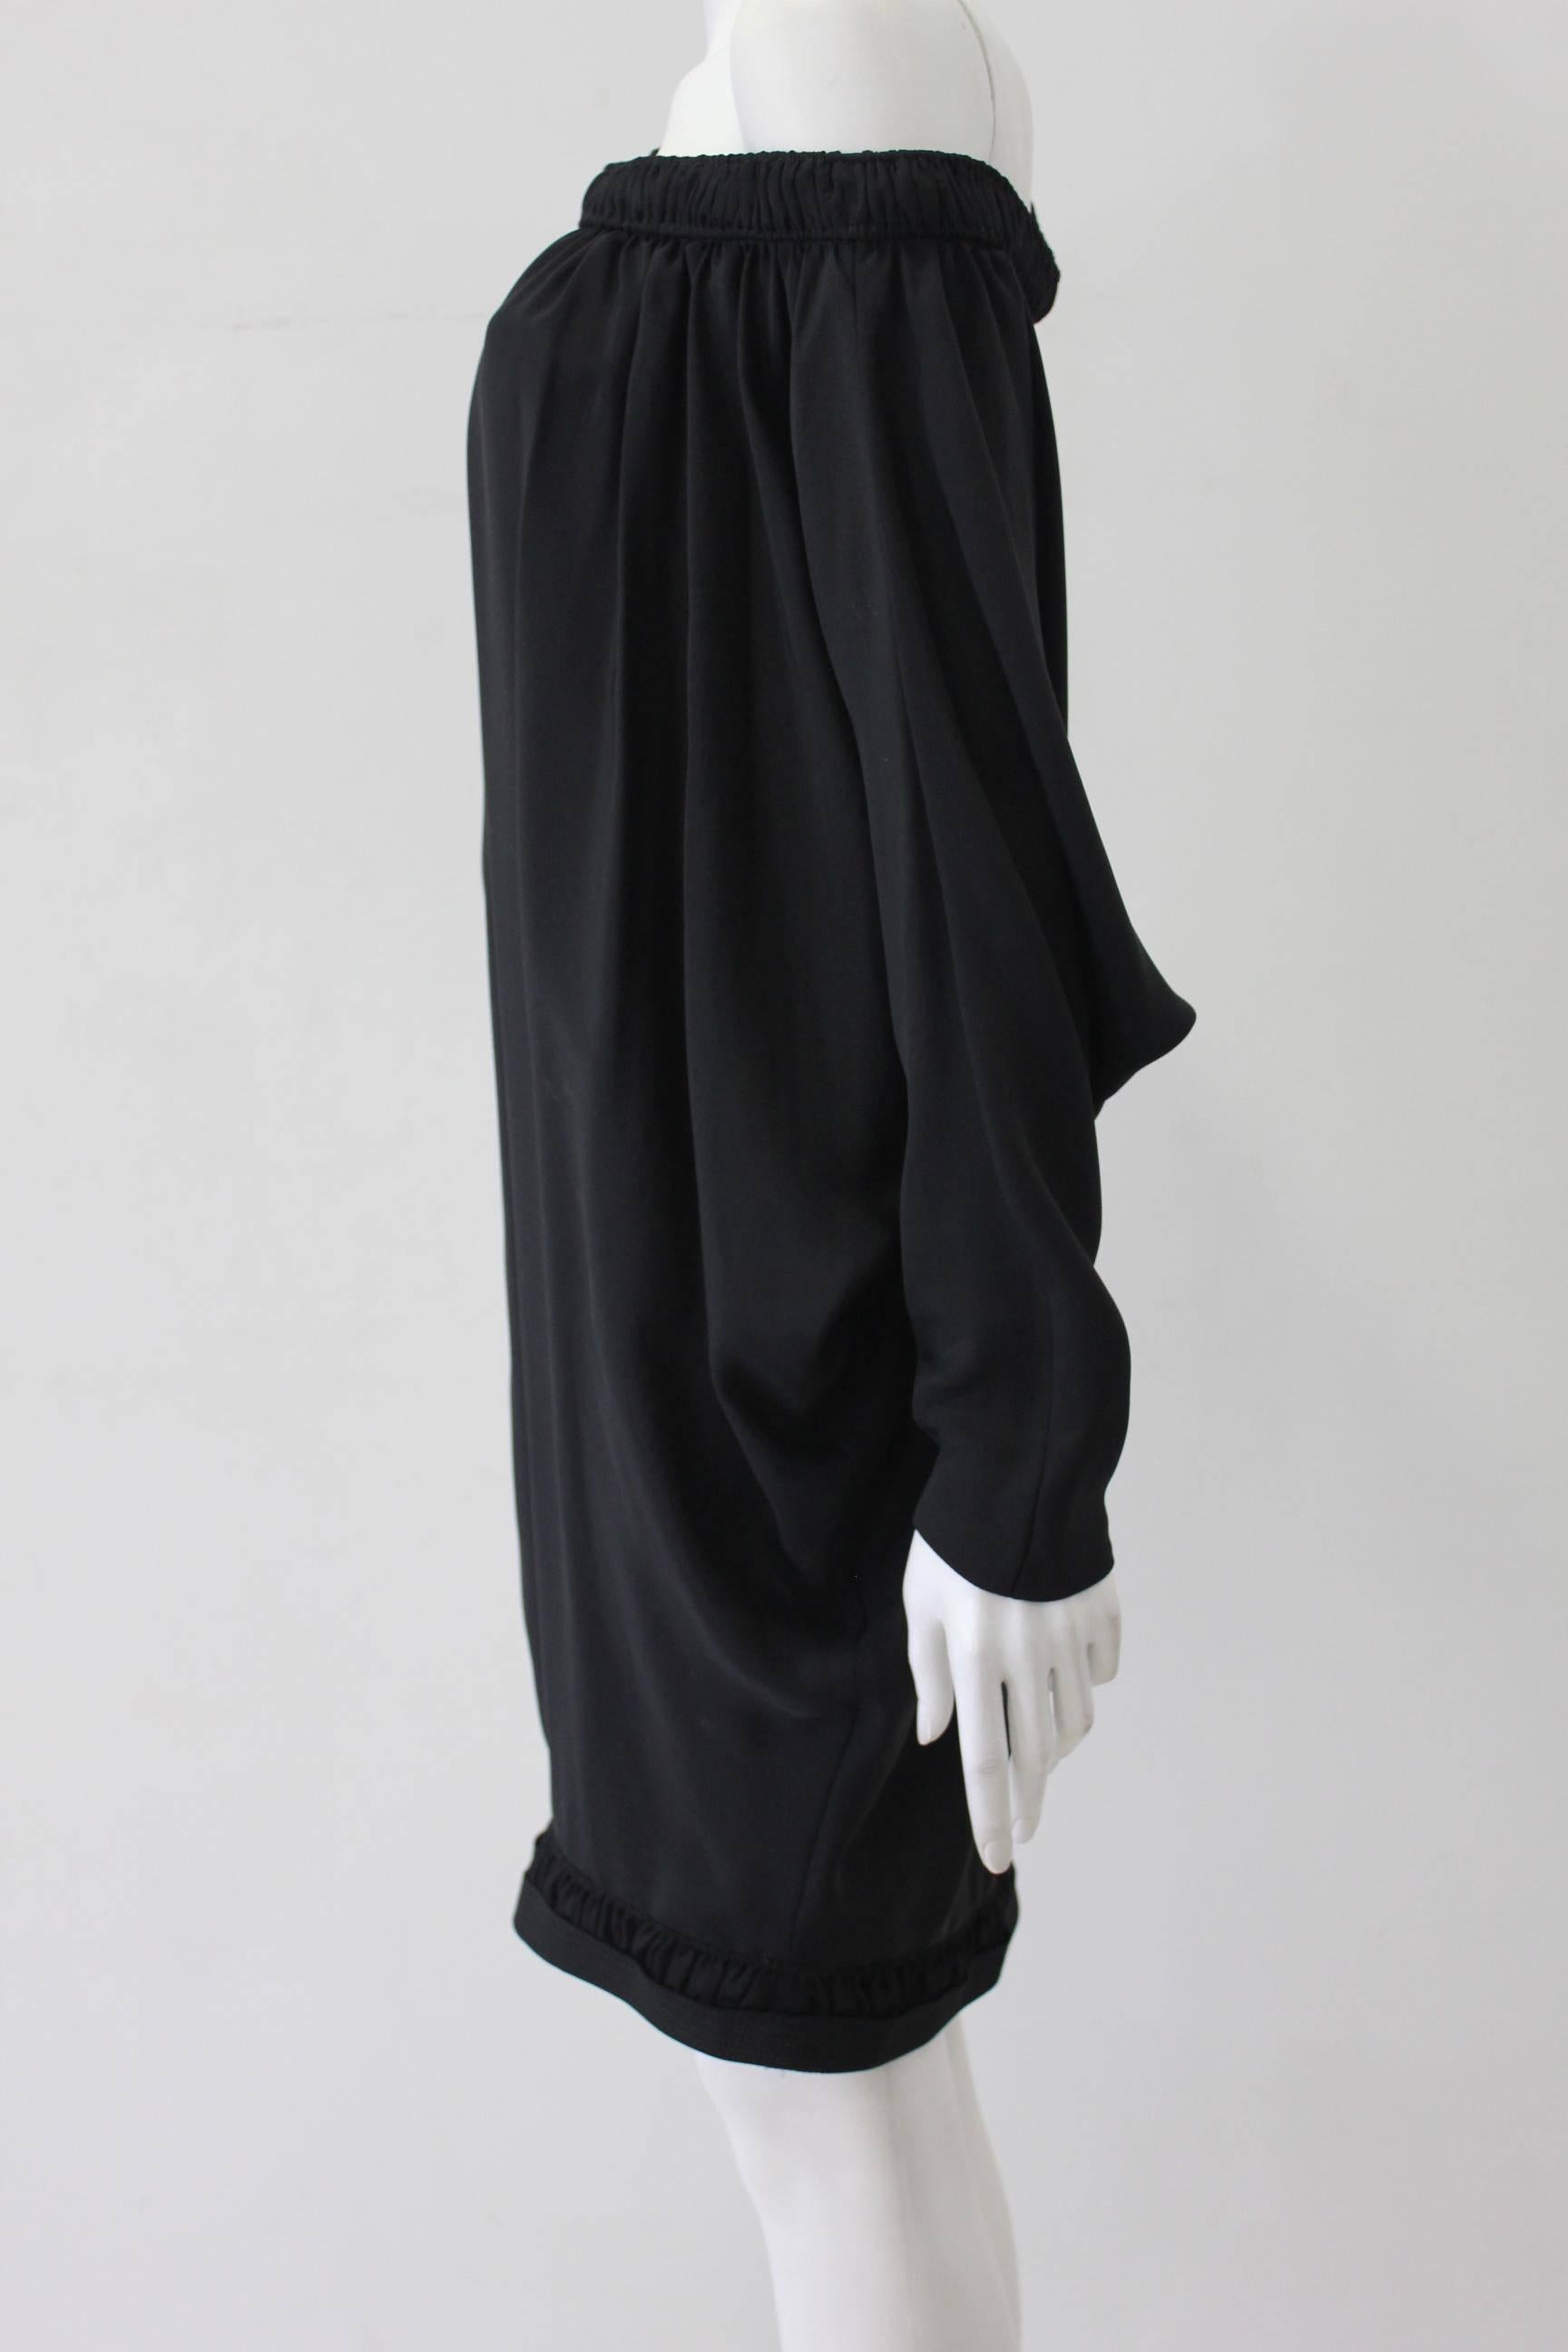 Black Rare Gianni Versace Couture Silk Dress Fall 1990 For Sale